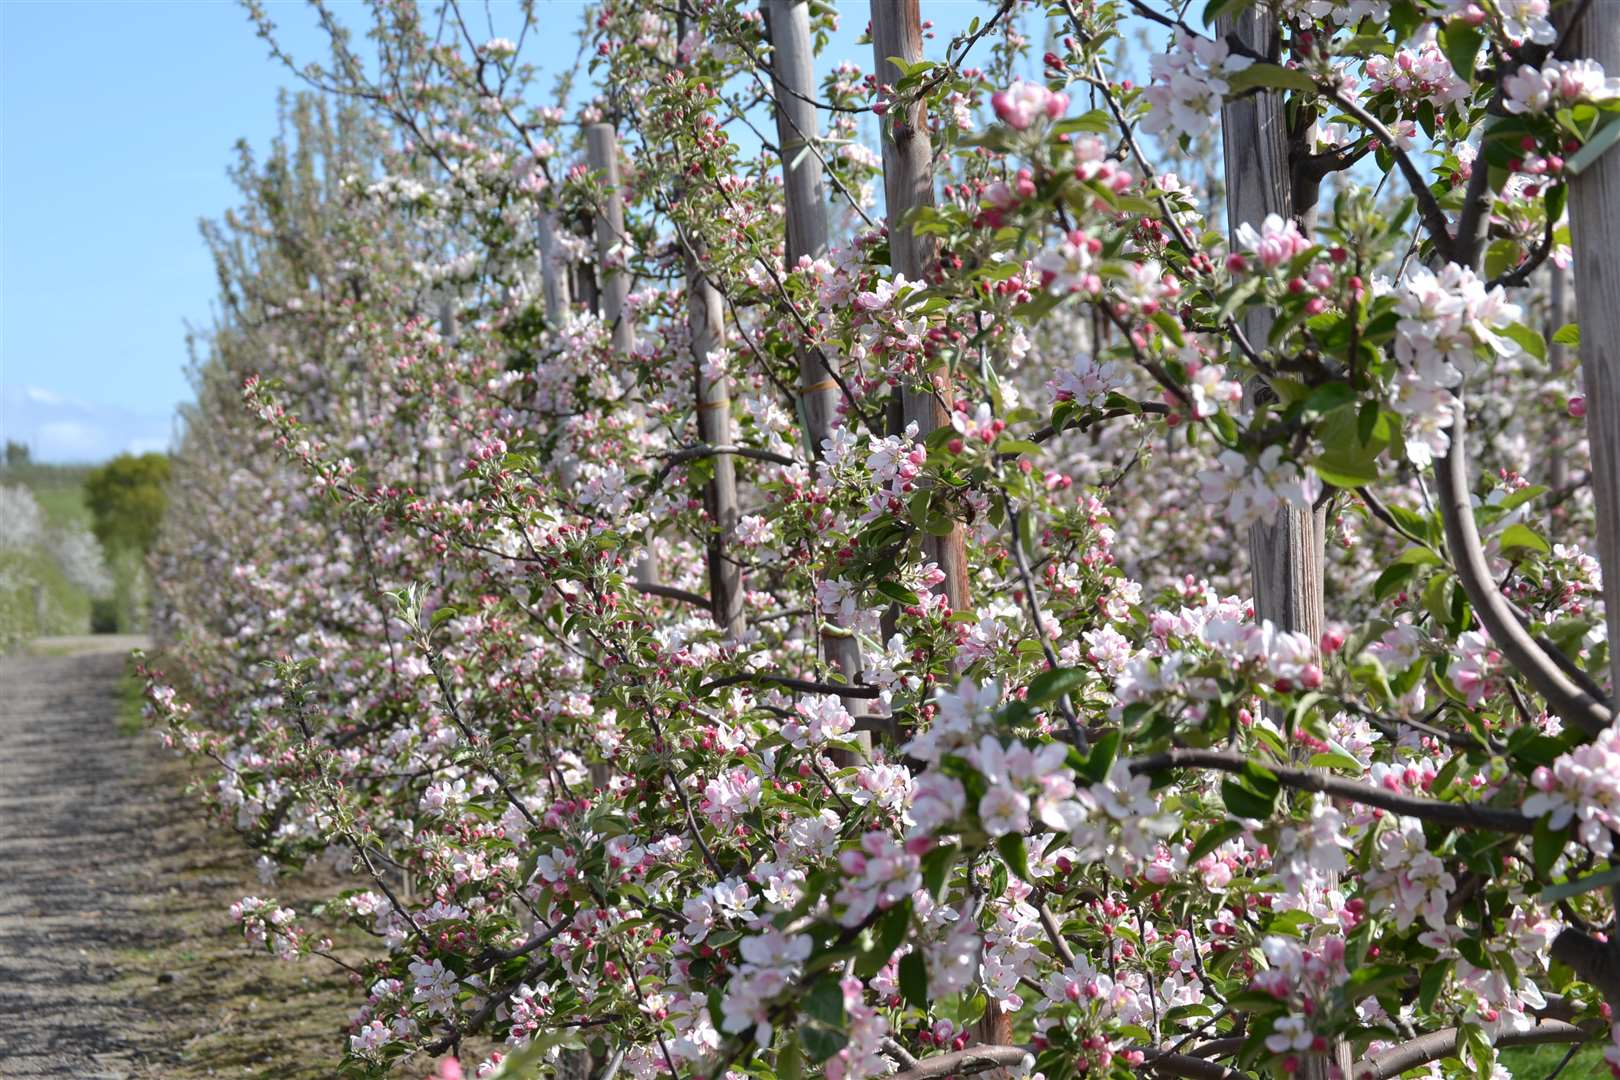 Apple blossom is opening early in some areas because of the warm December